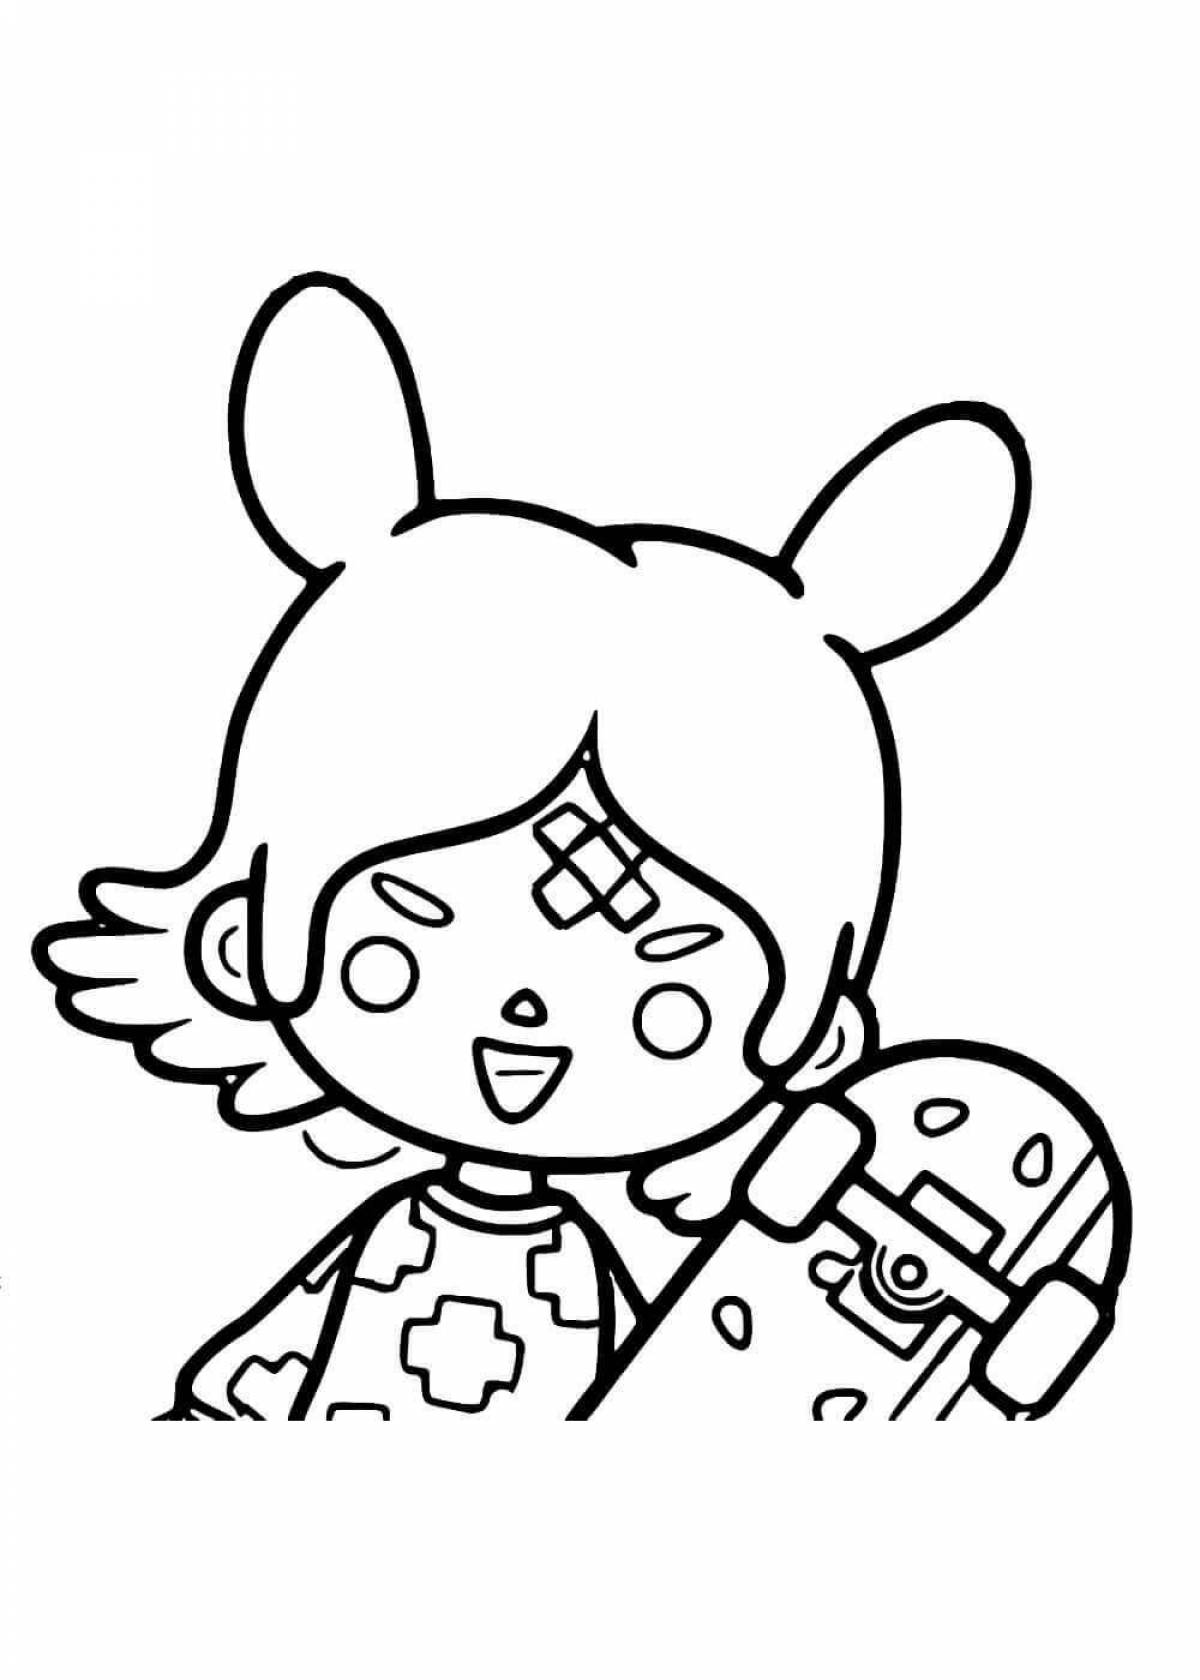 Charming toca life world coloring page